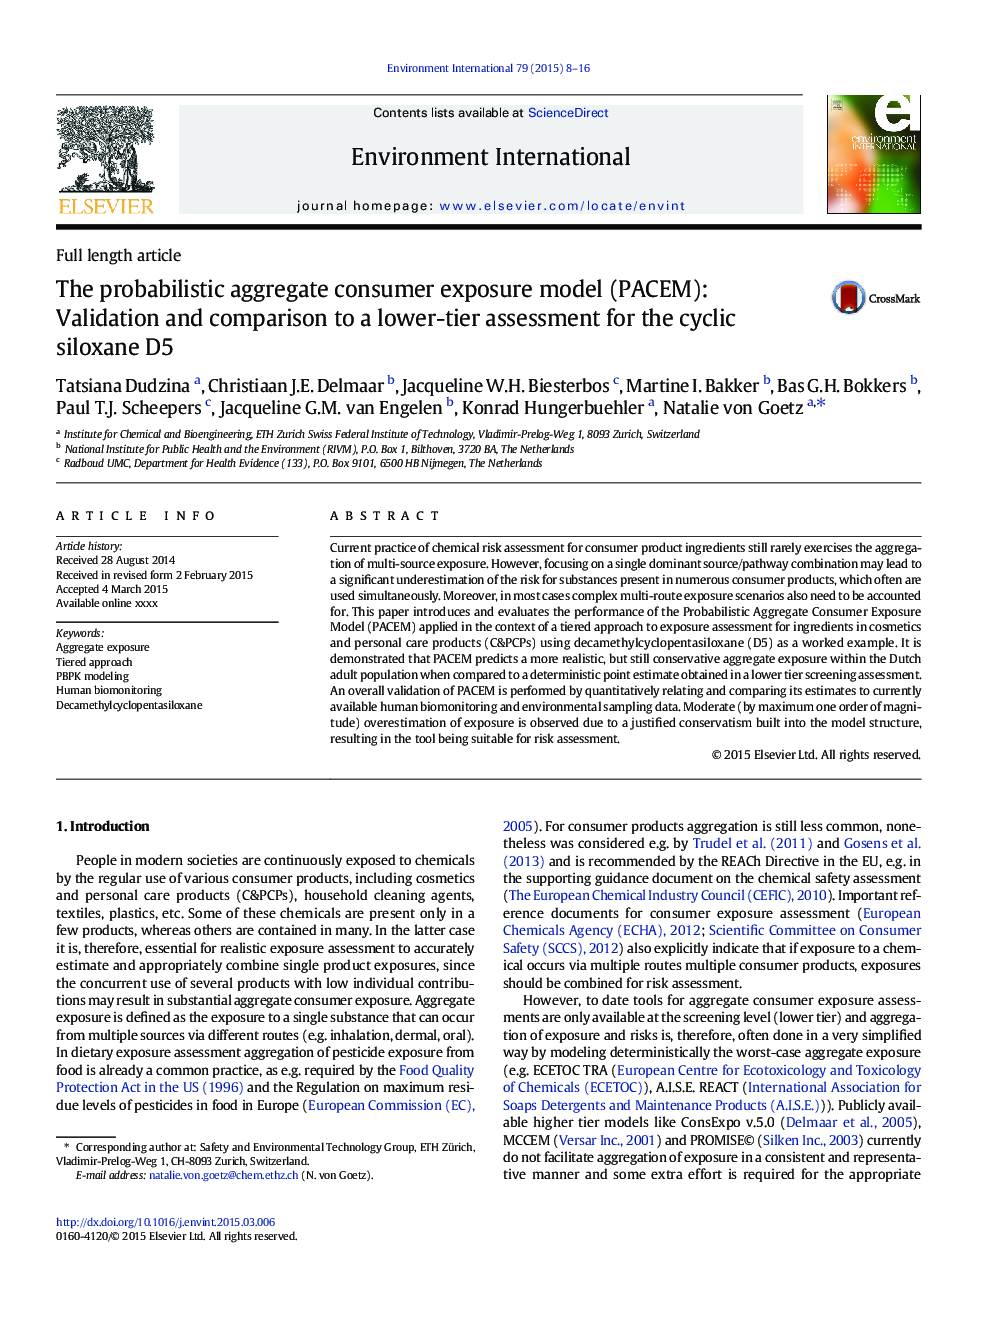 The probabilistic aggregate consumer exposure model (PACEM): Validation and comparison to a lower-tier assessment for the cyclic siloxane D5